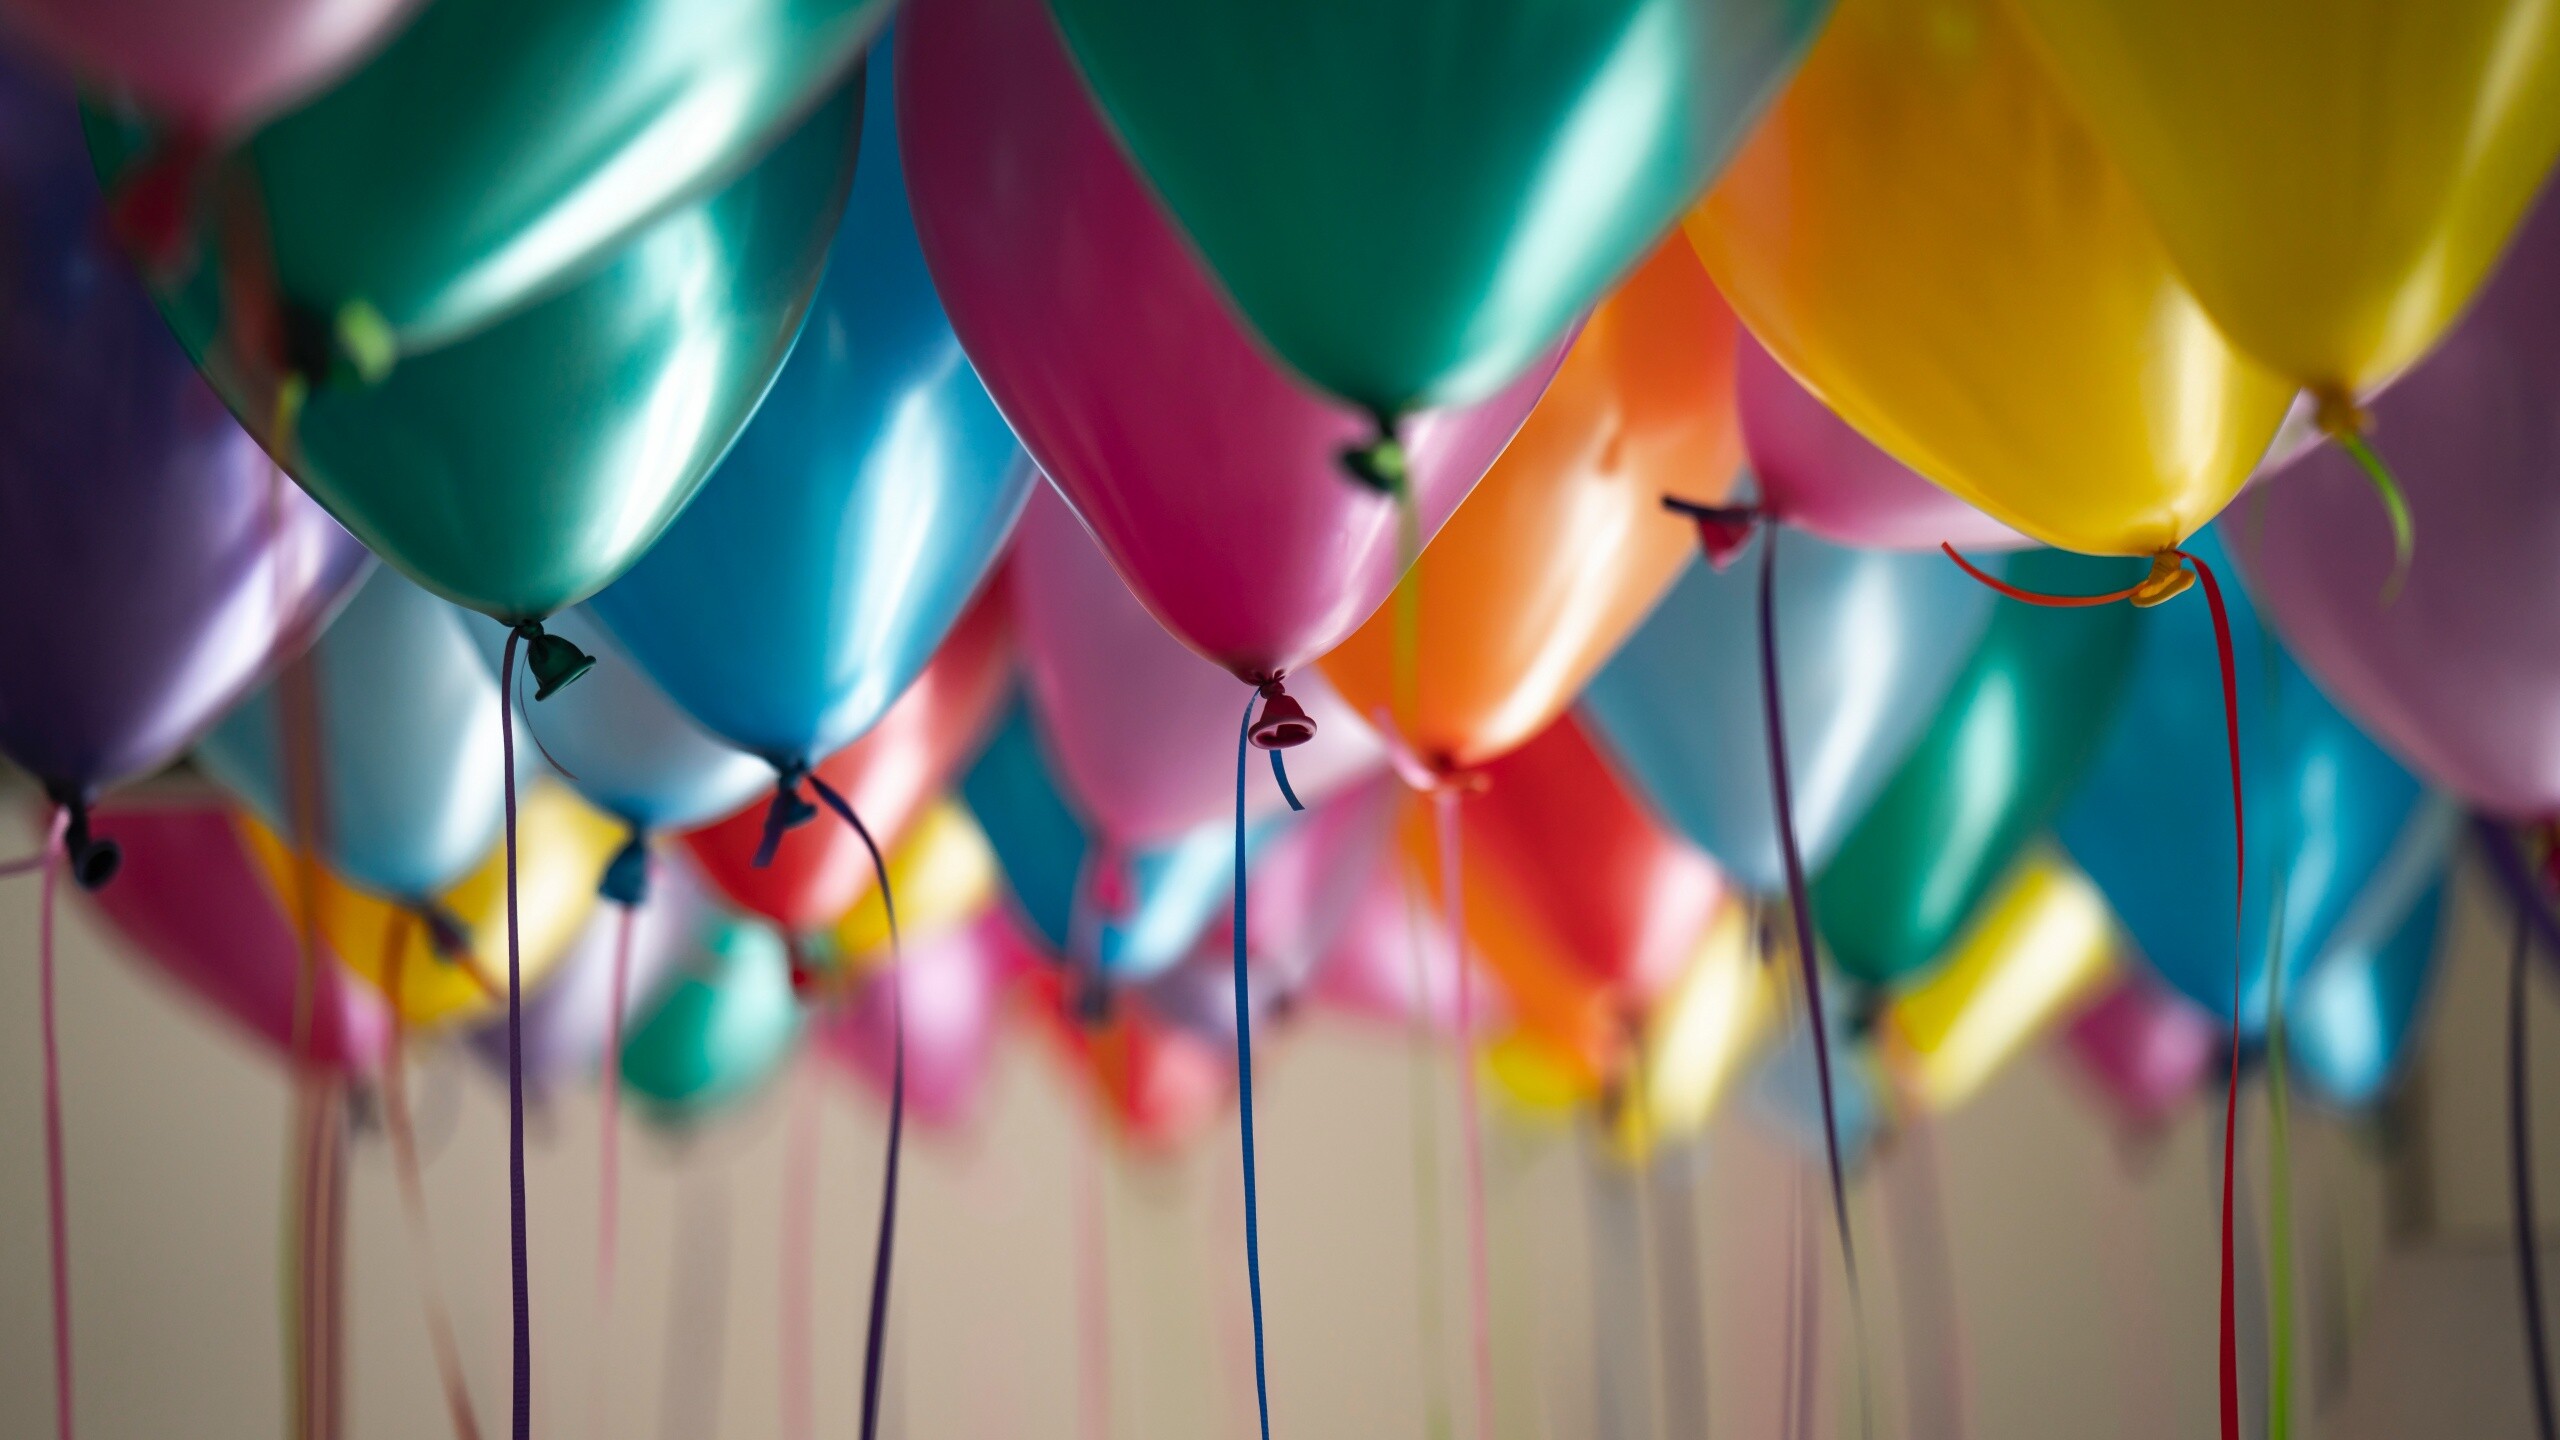 Birthday Party: Colorful balloons, Decorations, Social gathering. 2560x1440 HD Background.